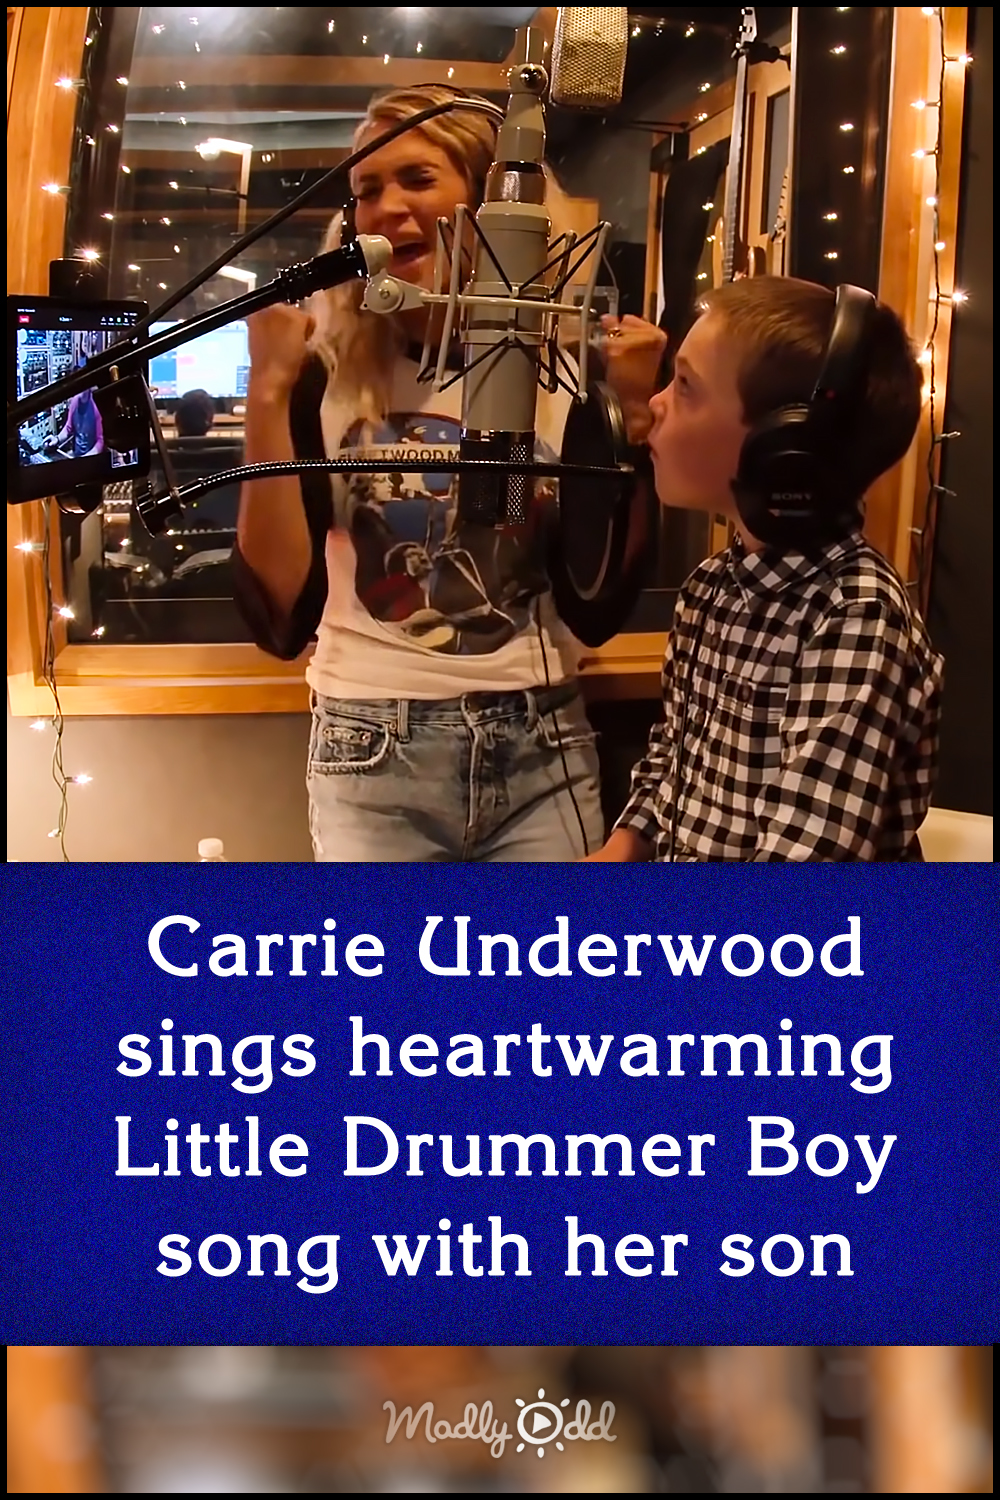 Carrie Underwood sings heartwarming Little Drummer Boy song with her son